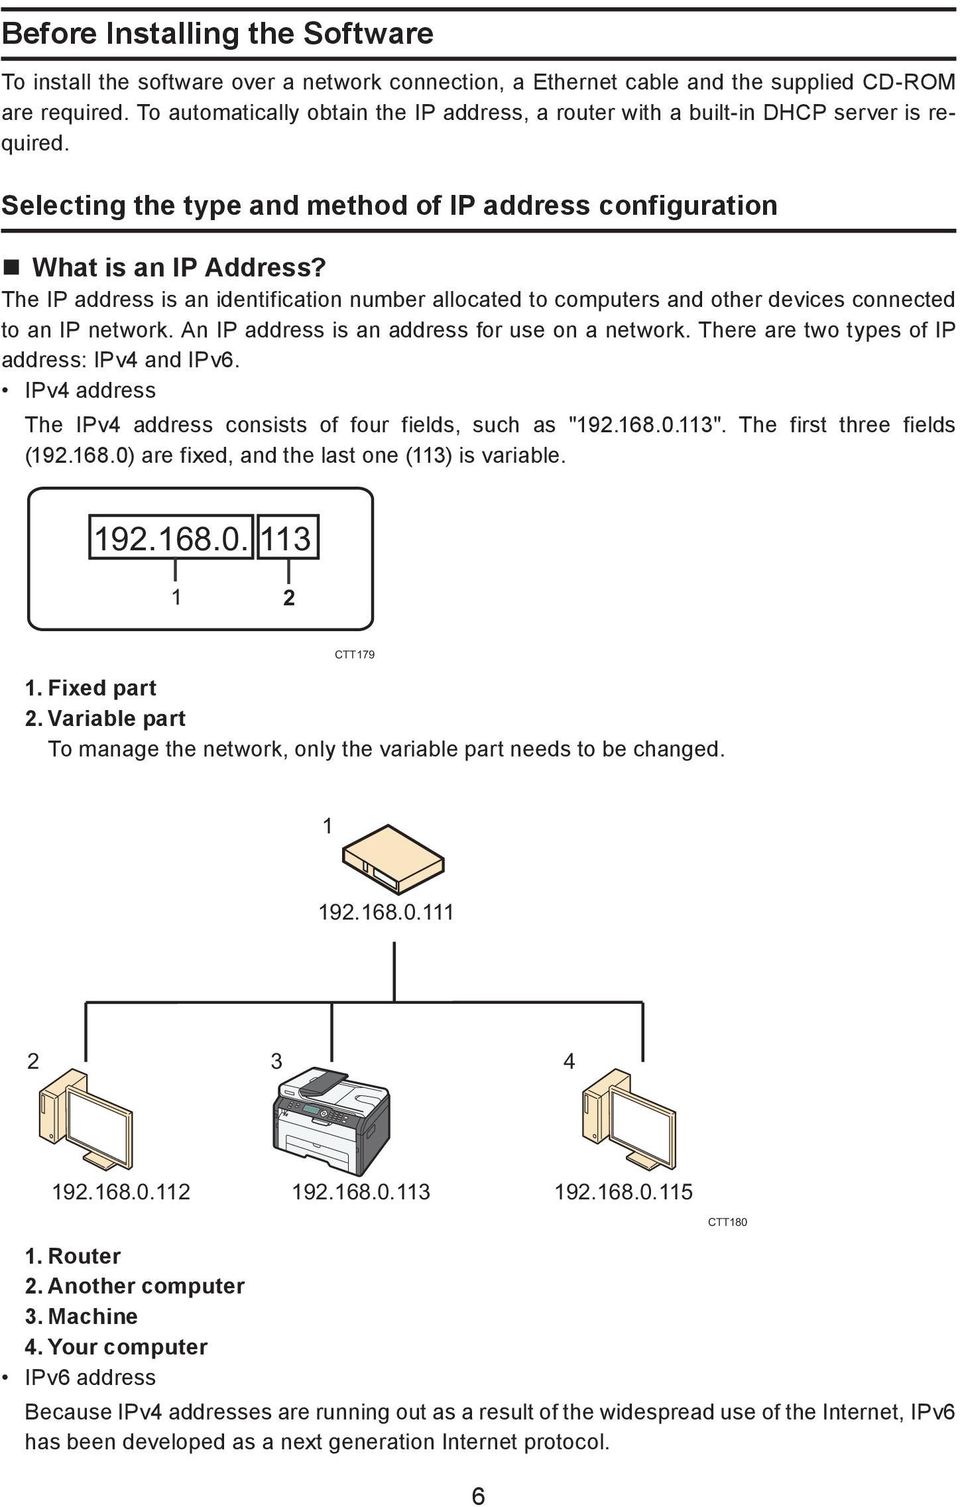 The IP address is an identification number allocated to computers and other devices connected to an IP network. An IP address is an address for use on a network.